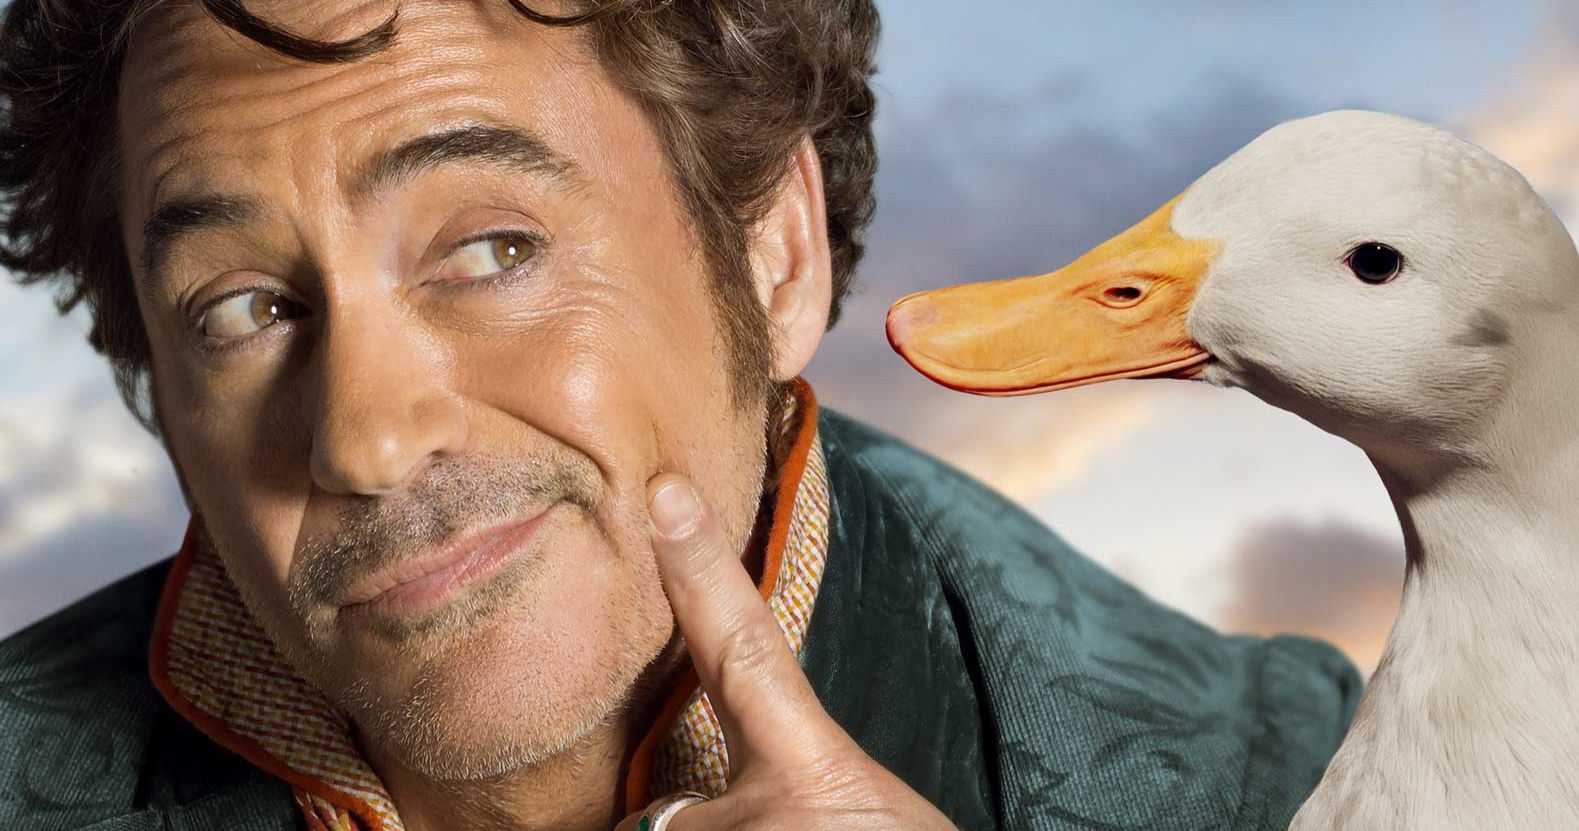 Dolittle Character Posters Introduce Robert Downey Jr.'s Menagerie of Animal Pals